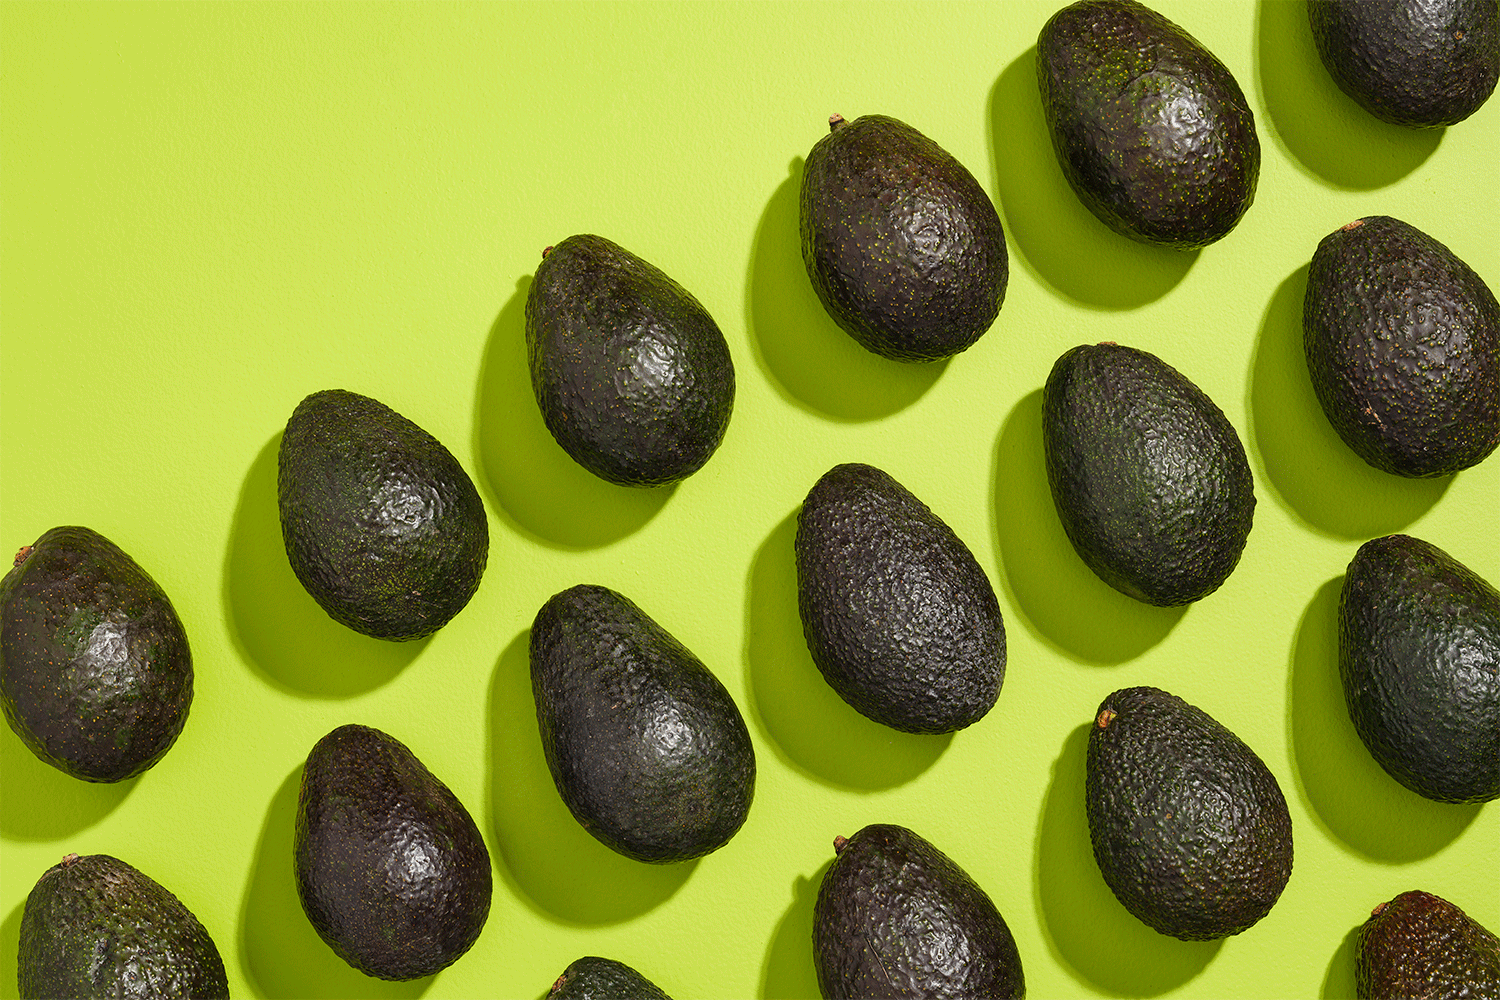 It’s a dangerous time of year for avocado lovers